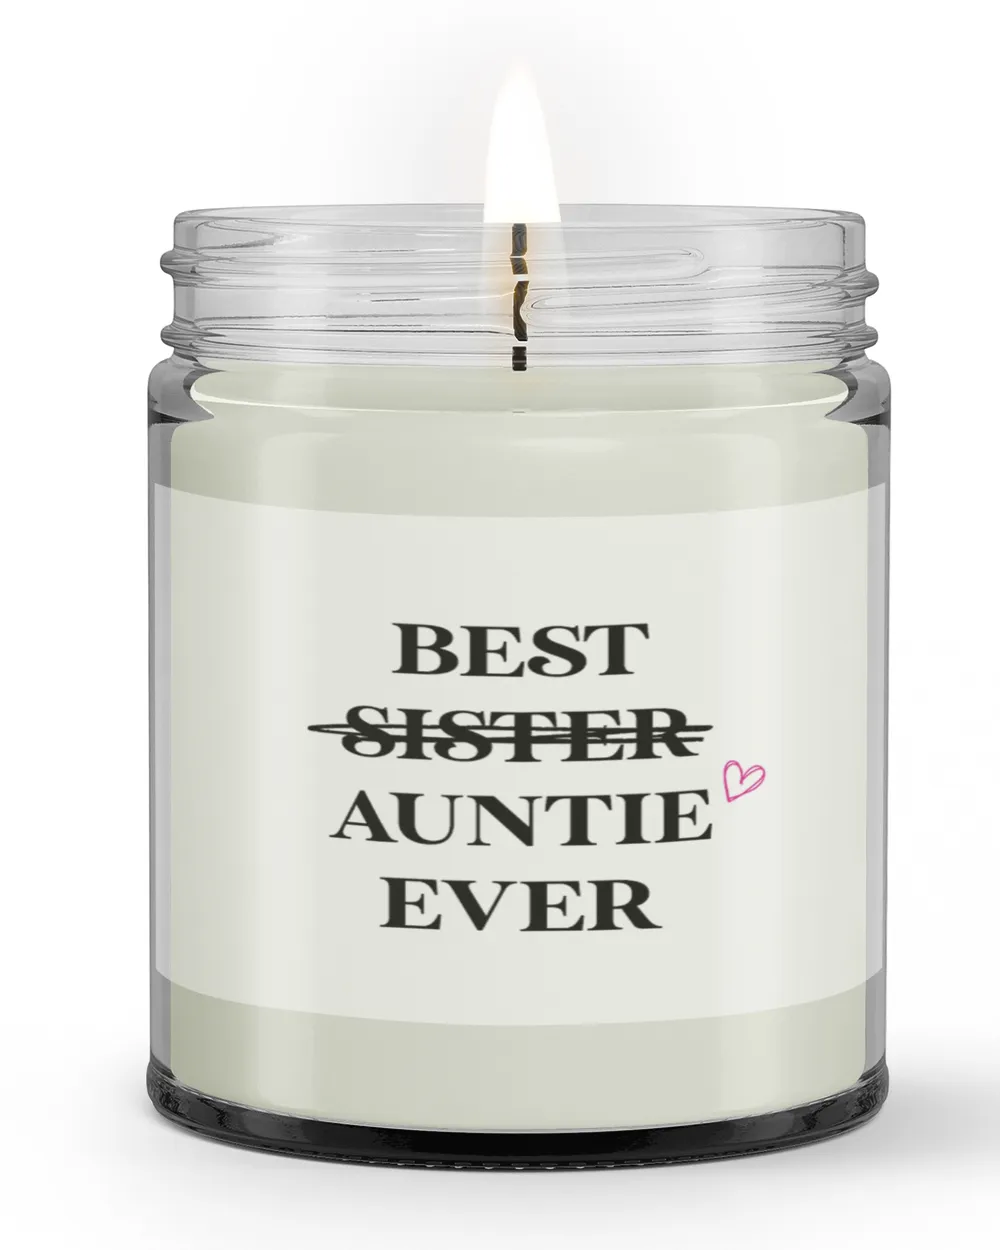 "Best (Sister) Auntie Ever" Pregnancy Announcement Candle